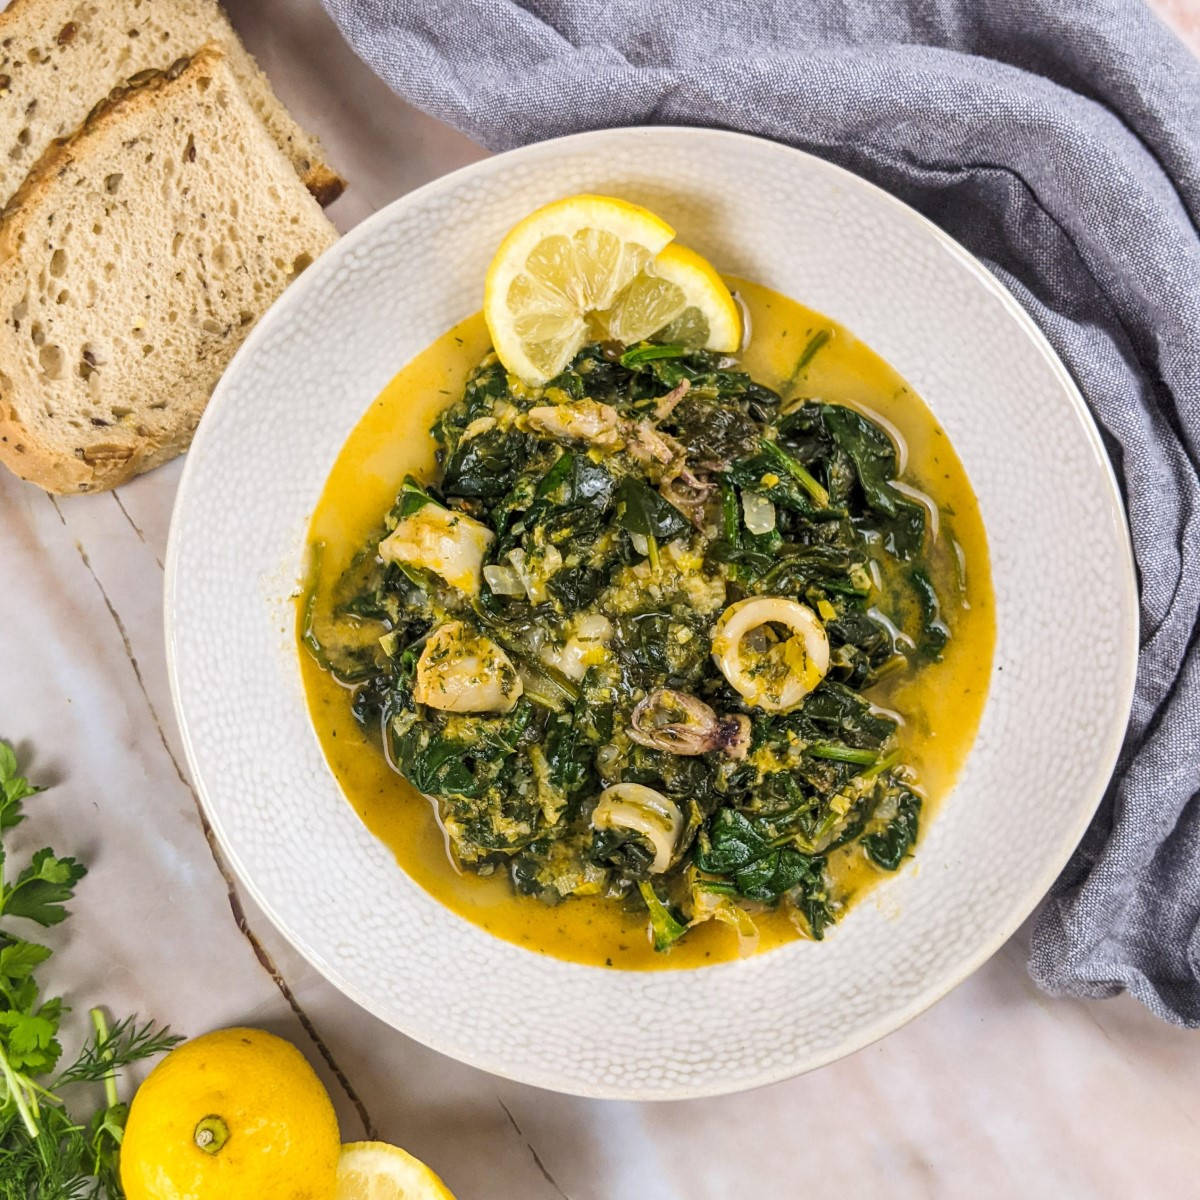 Squid stew with spinach served in a white bowl next to a lemon and some fresh dill and parsley.